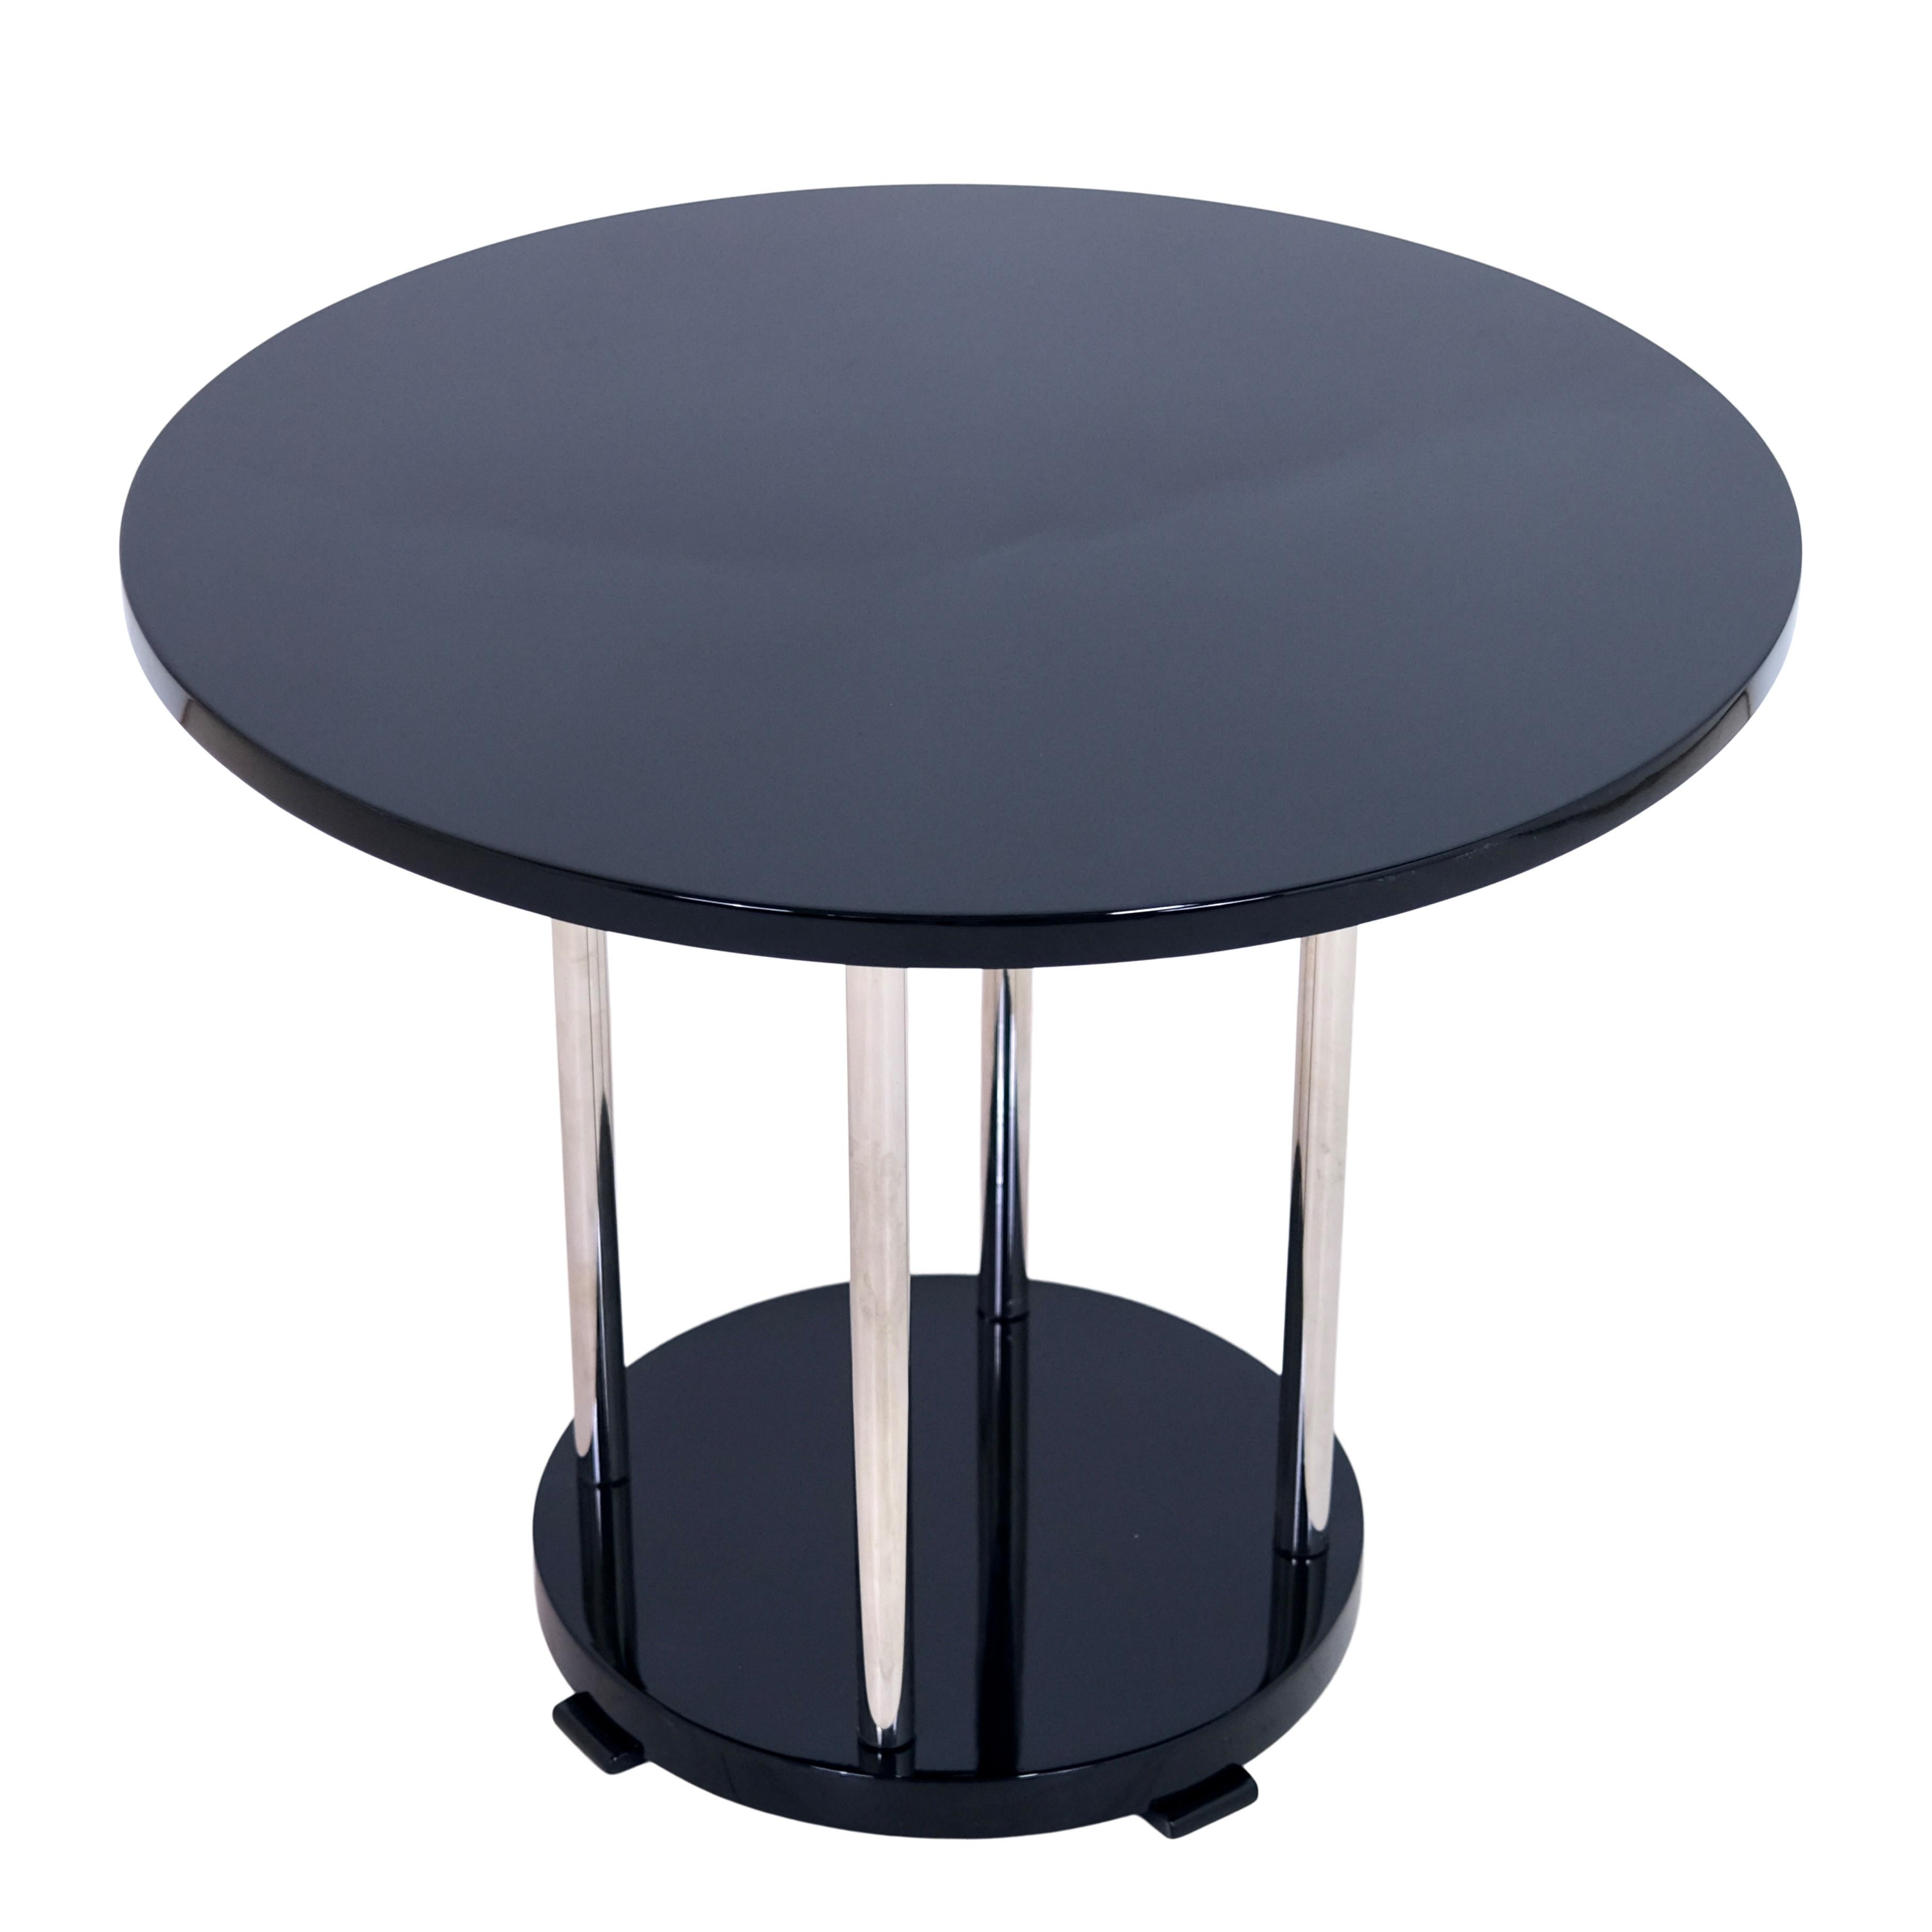 Blackened Black Piano Lacquer French Art Deco Style Side Table with Chromed Tubes For Sale